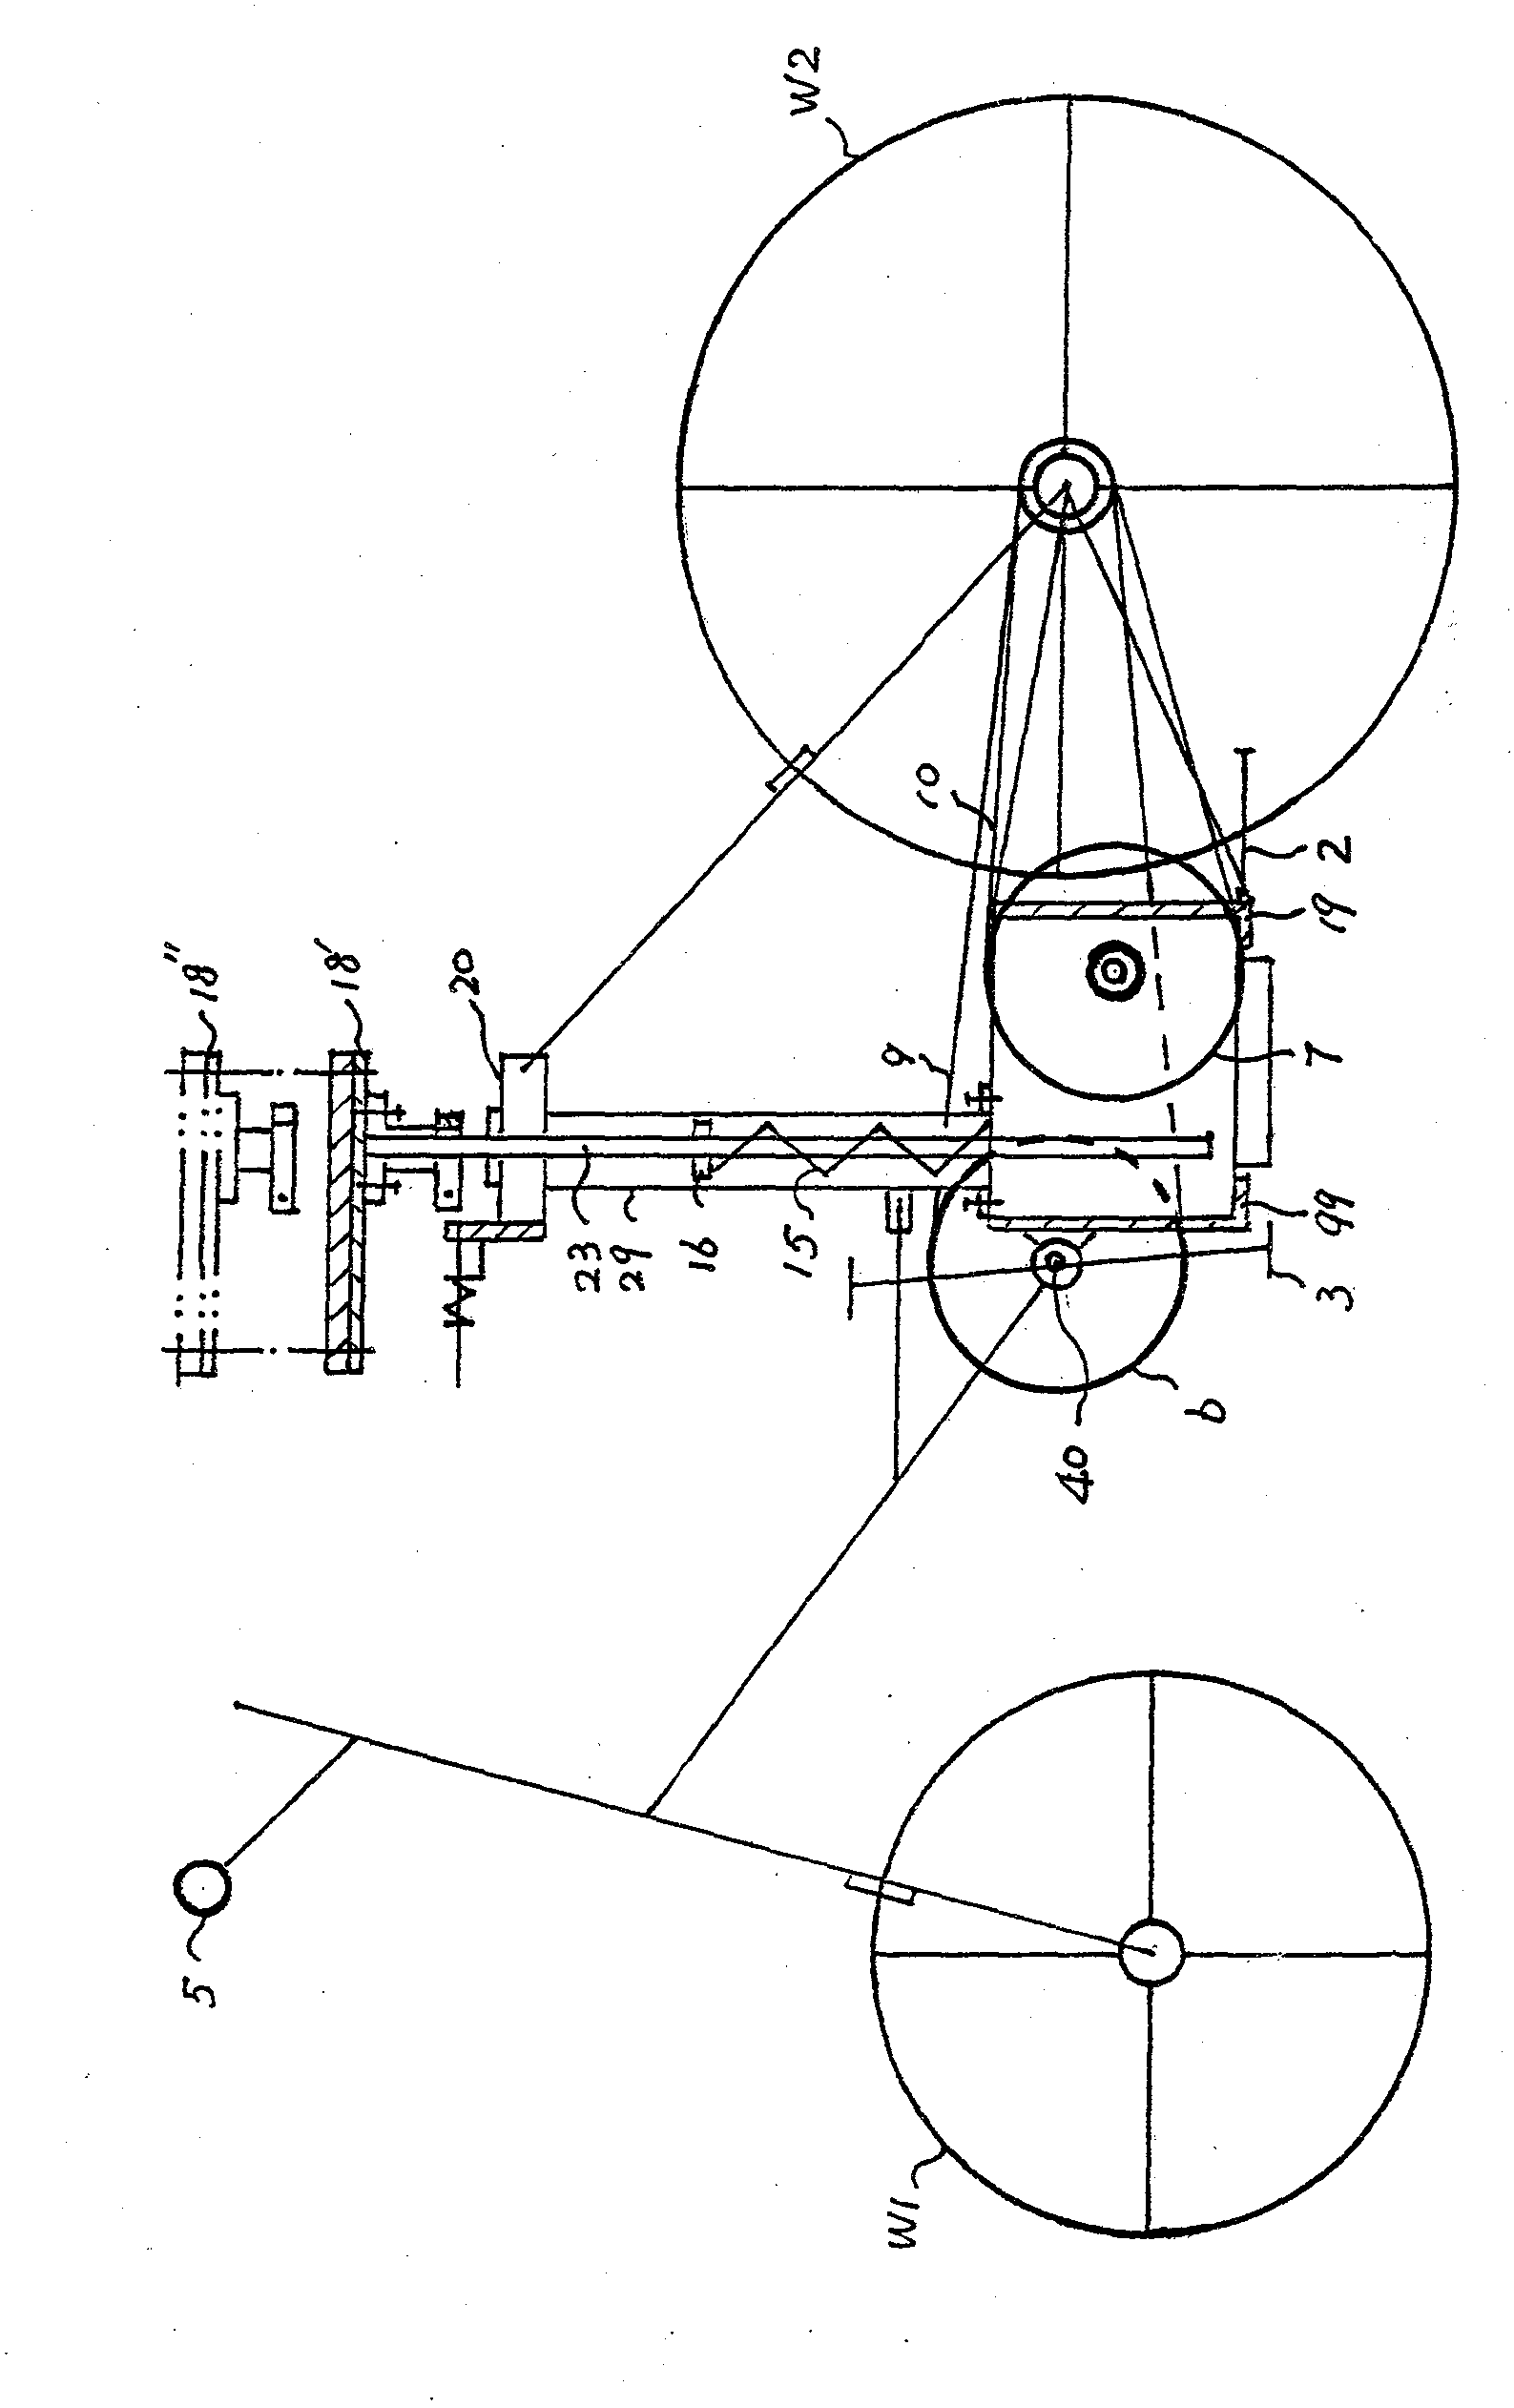 Non-motor vehicle provided with reciprocating type seat